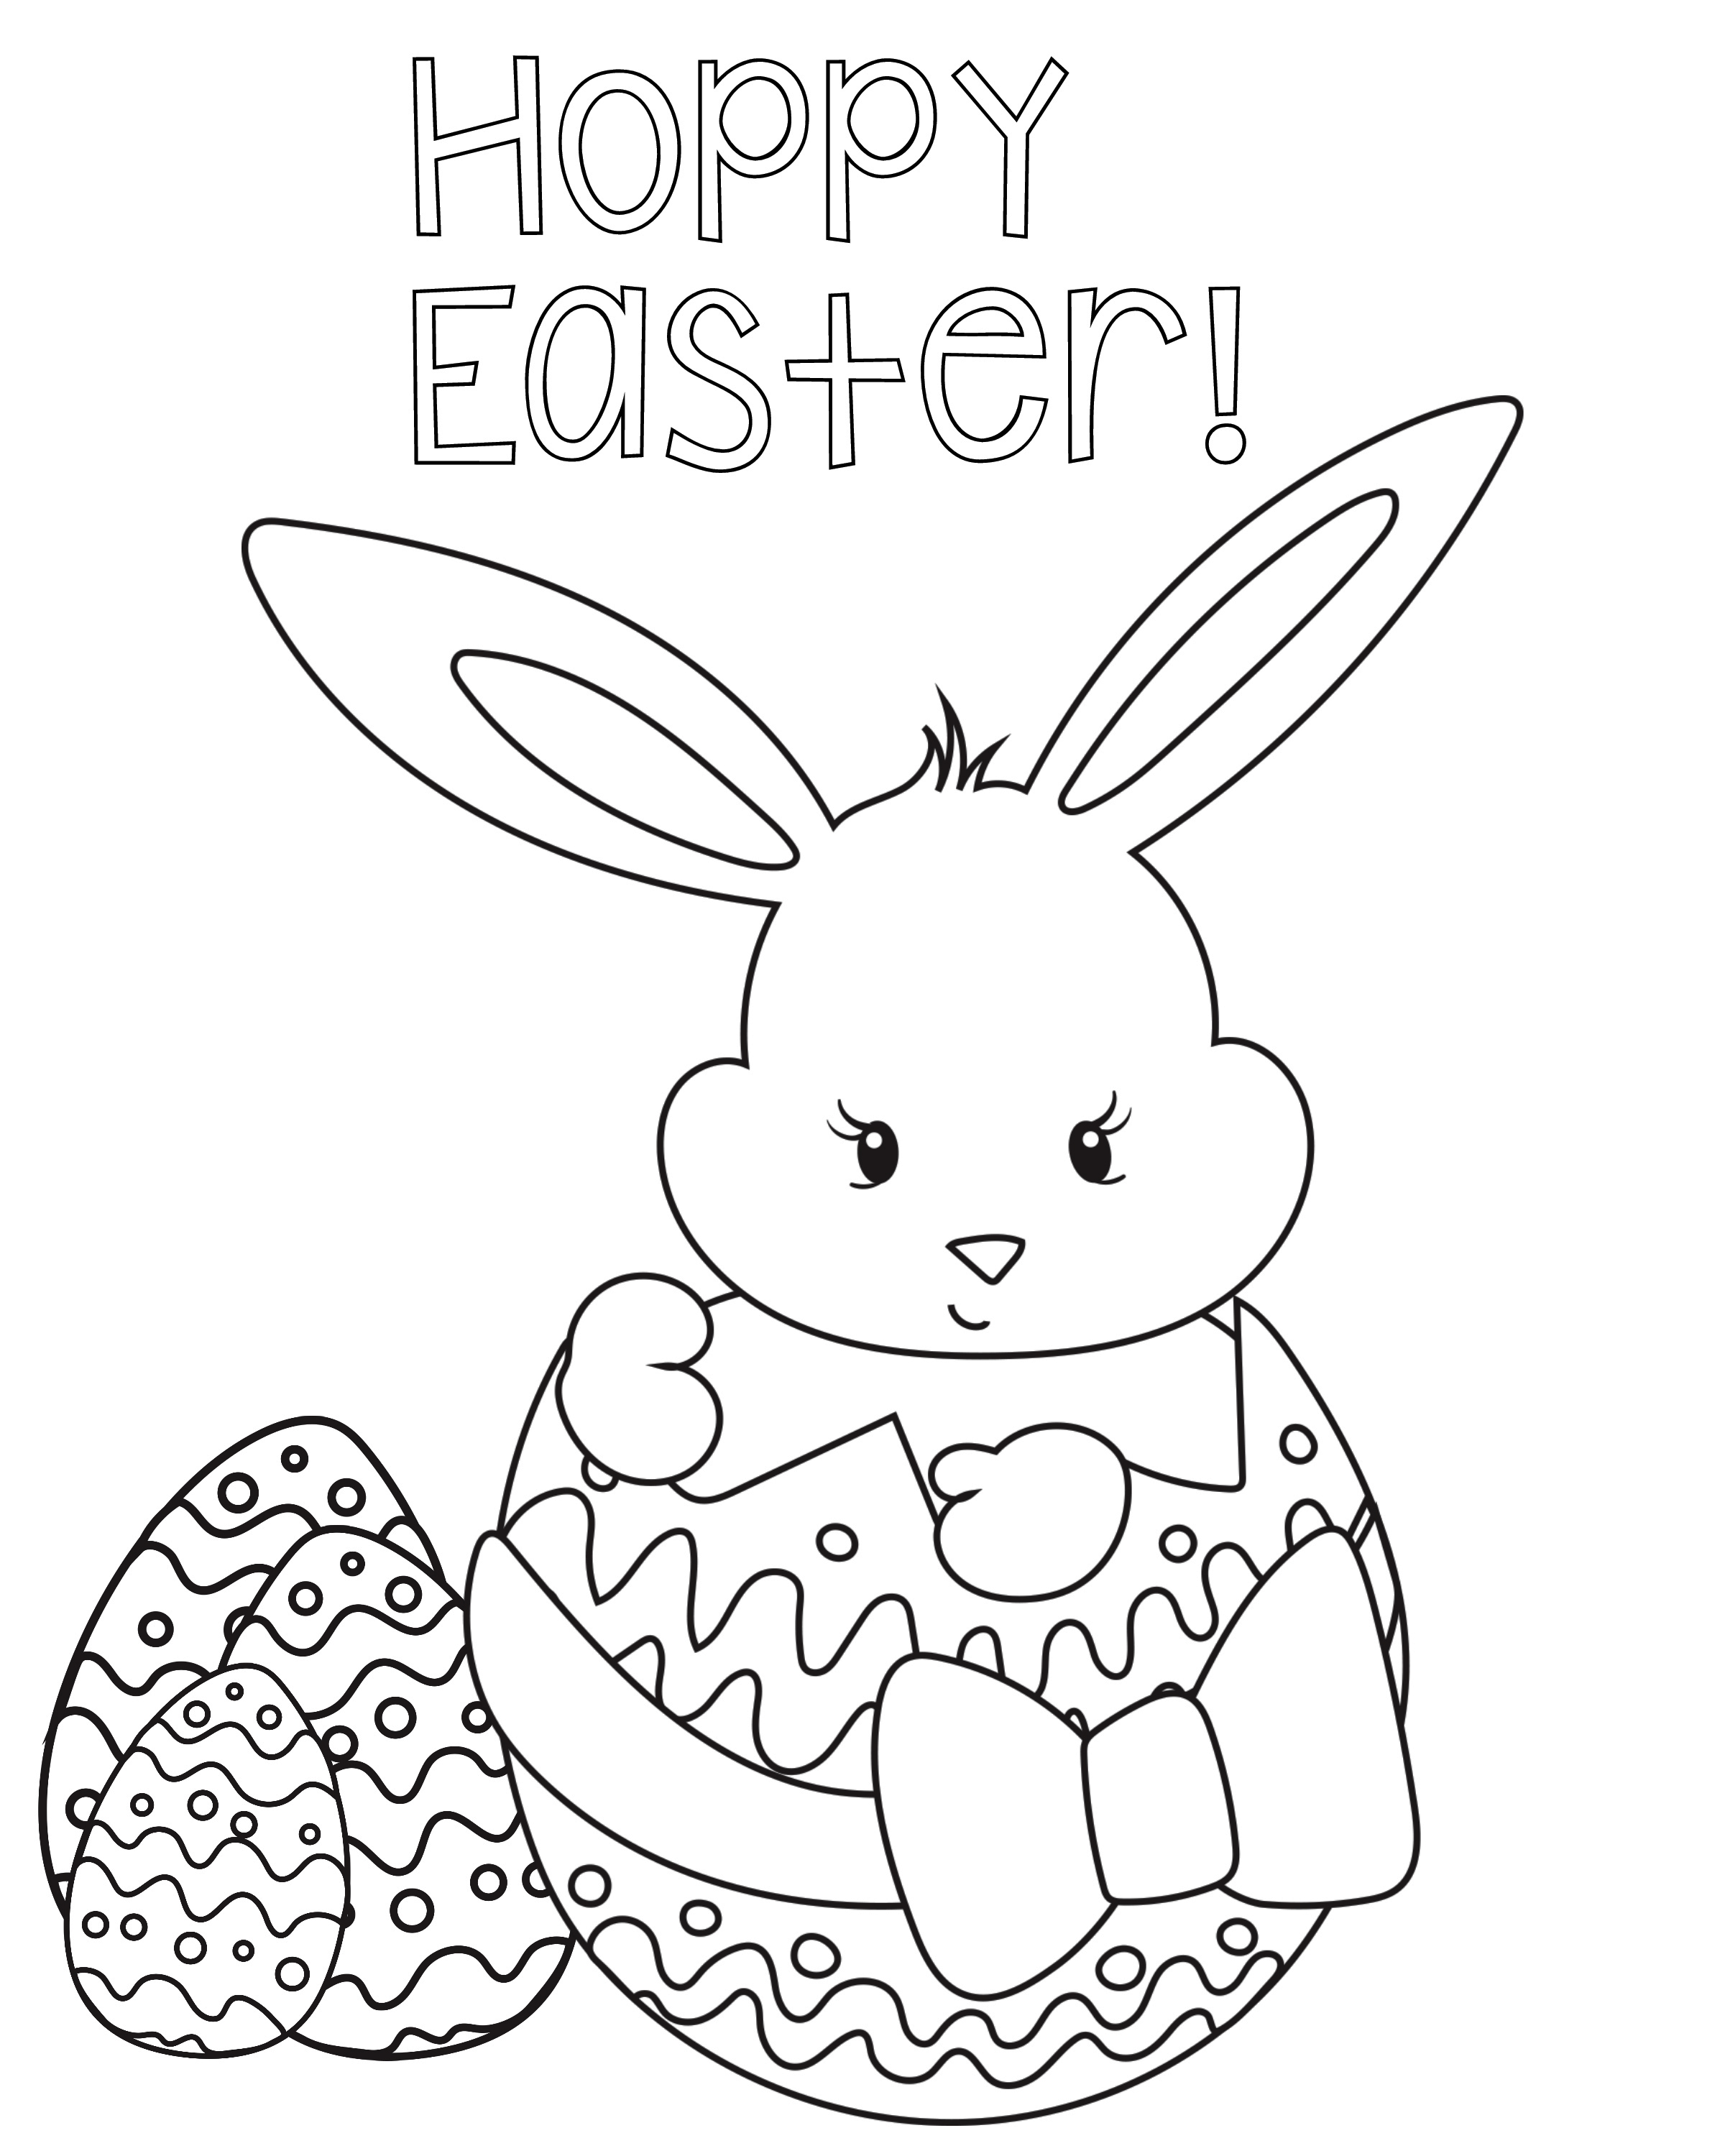 printable-free-easter-coloring-pages-free-templates-printable